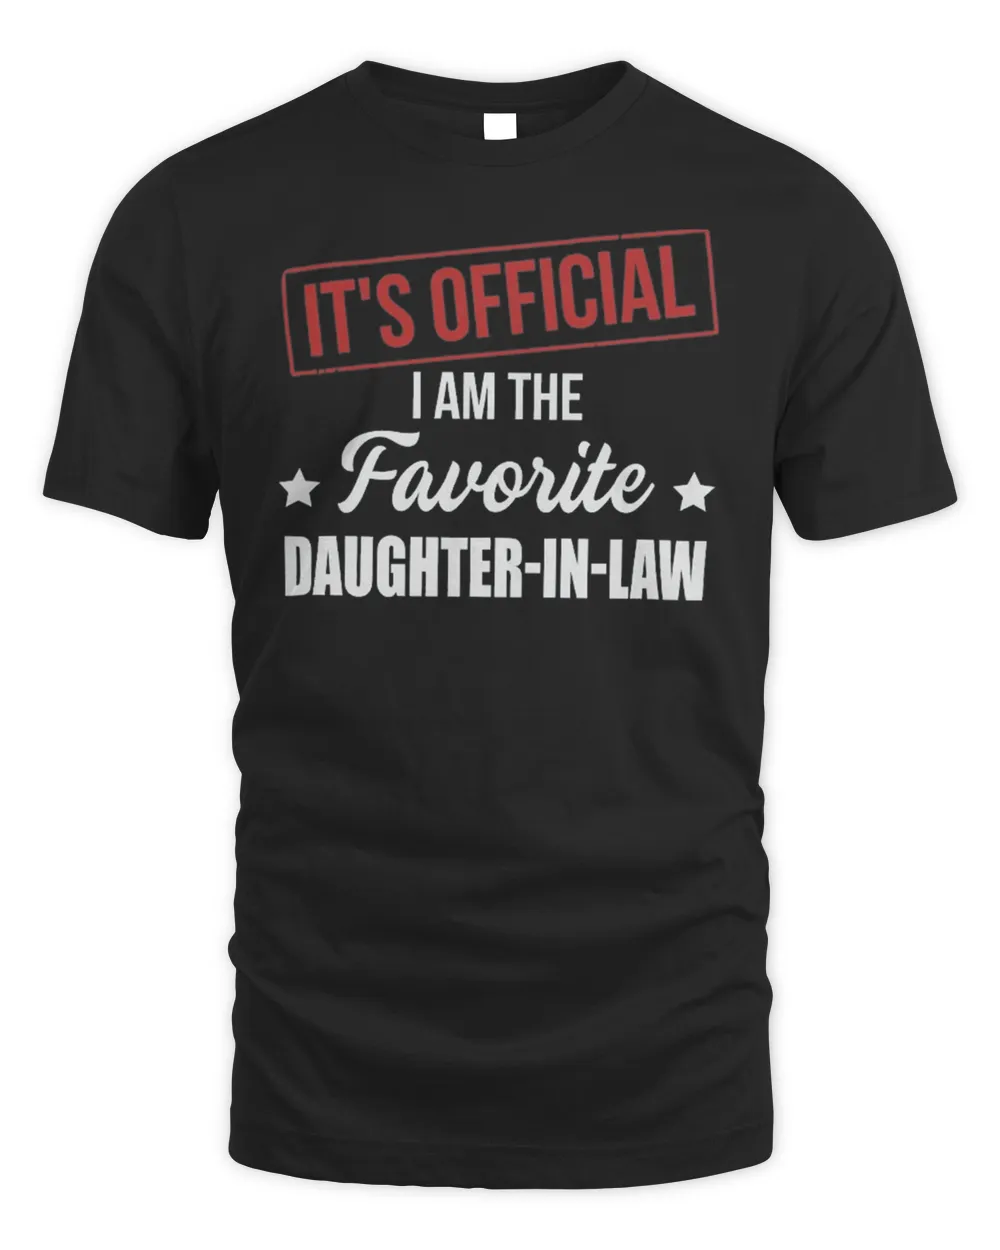 It's Official I Am The Favorite Daughter-in-law Shirt